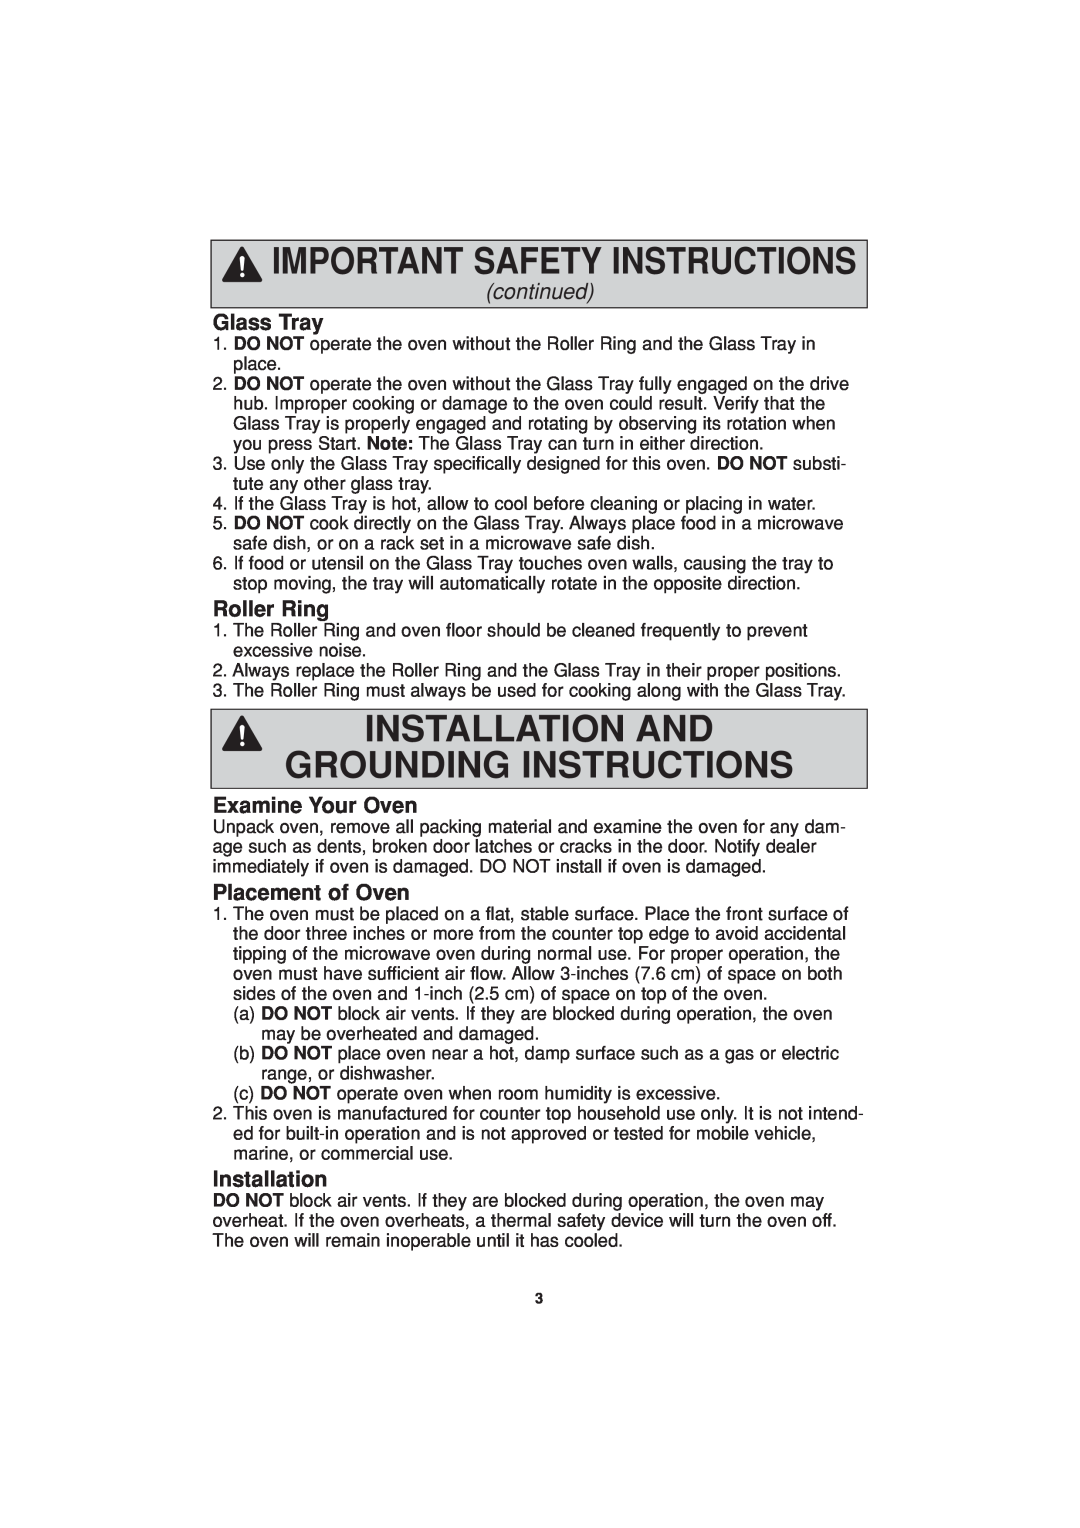 Panasonic NN-H634 Installation And Grounding Instructions, Glass Tray, Roller Ring, Examine Your Oven, Placement of Oven 